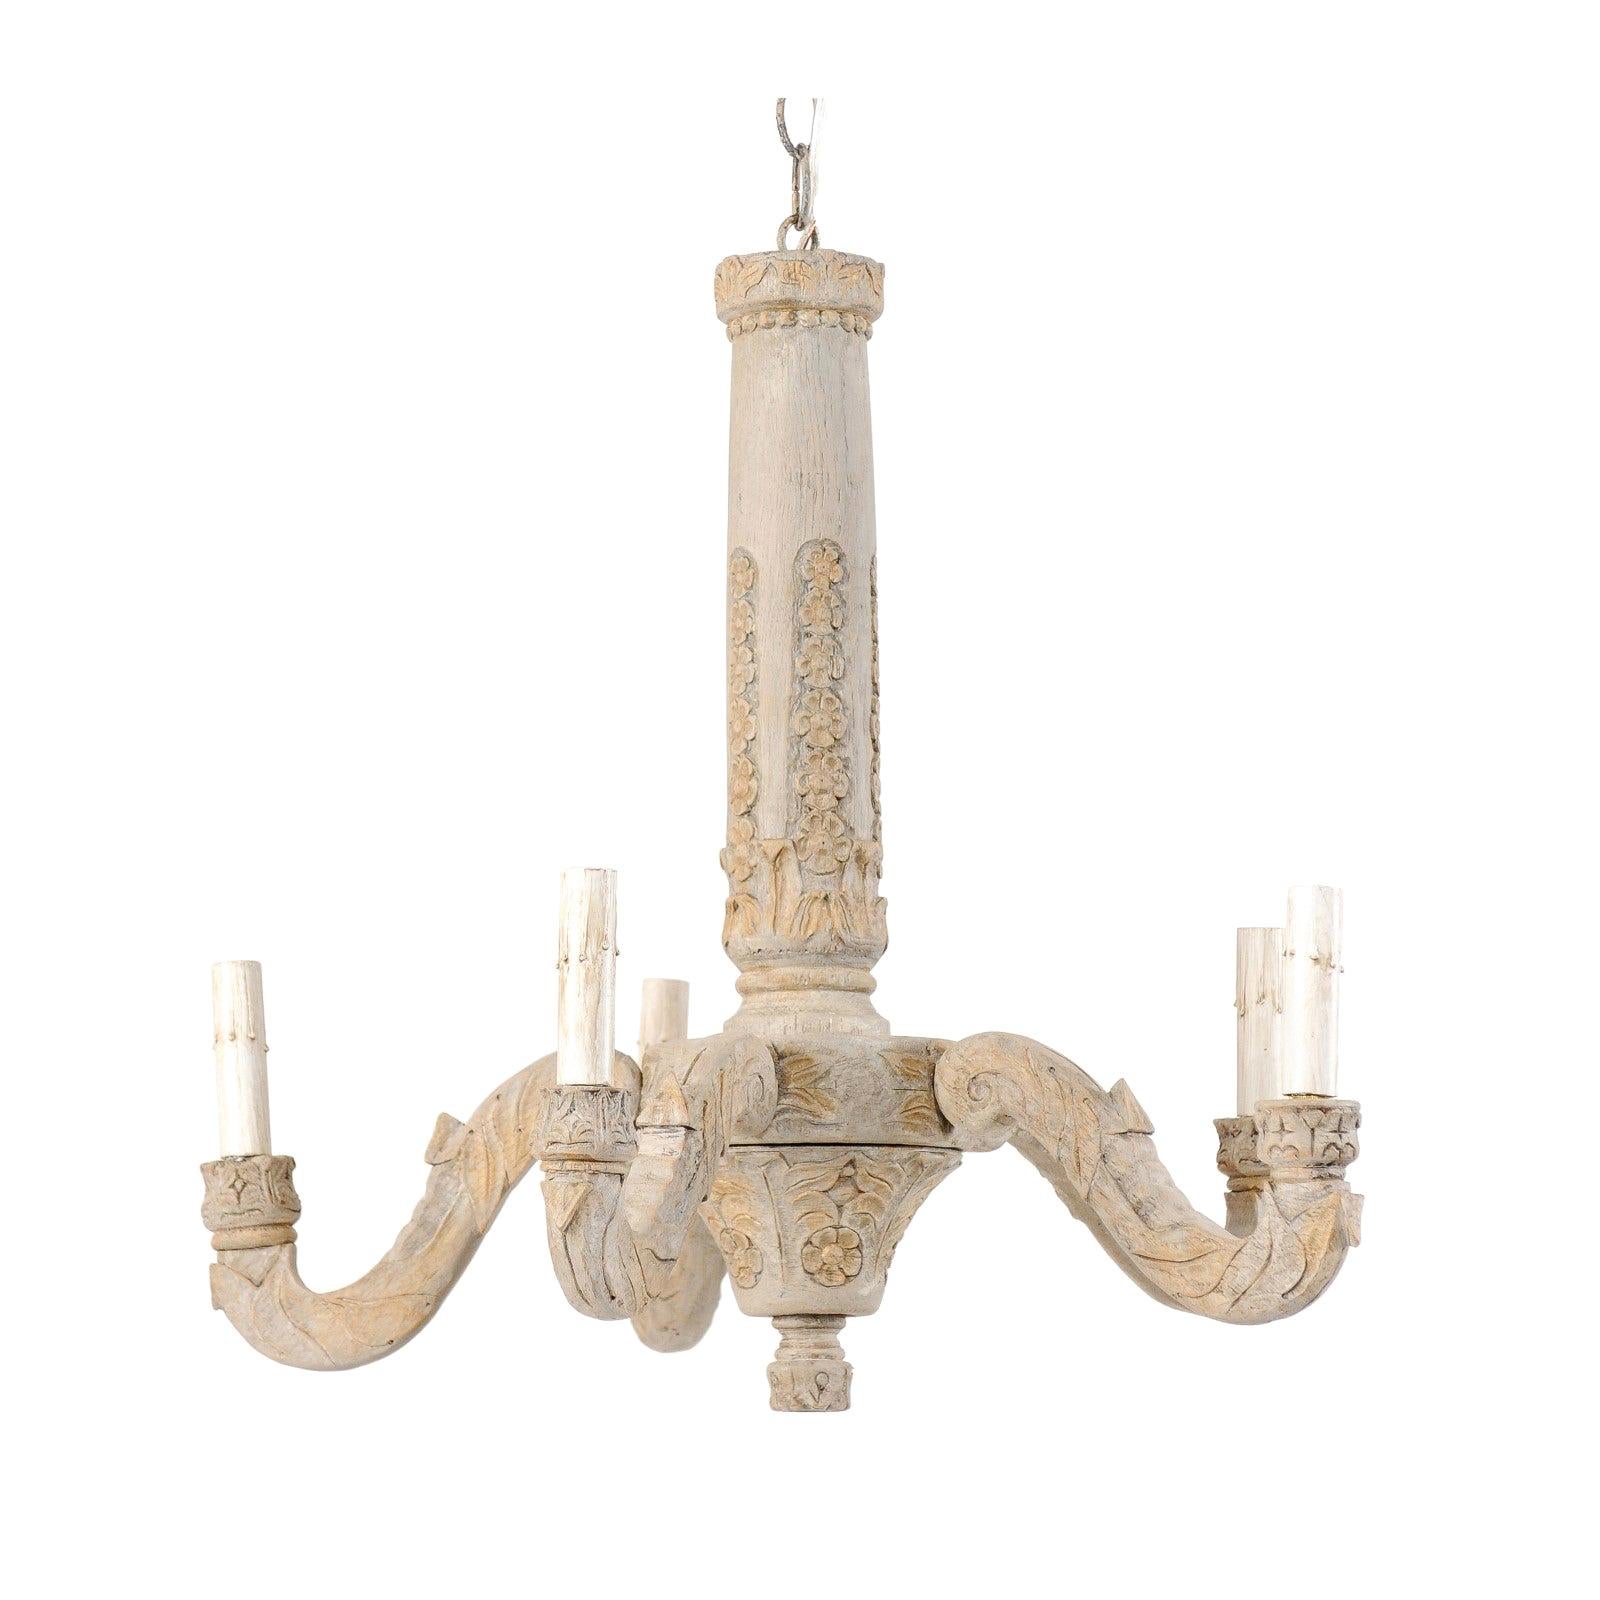 French 5-Light Carved and Painted Wood Chandelier from the Mid-20th Century